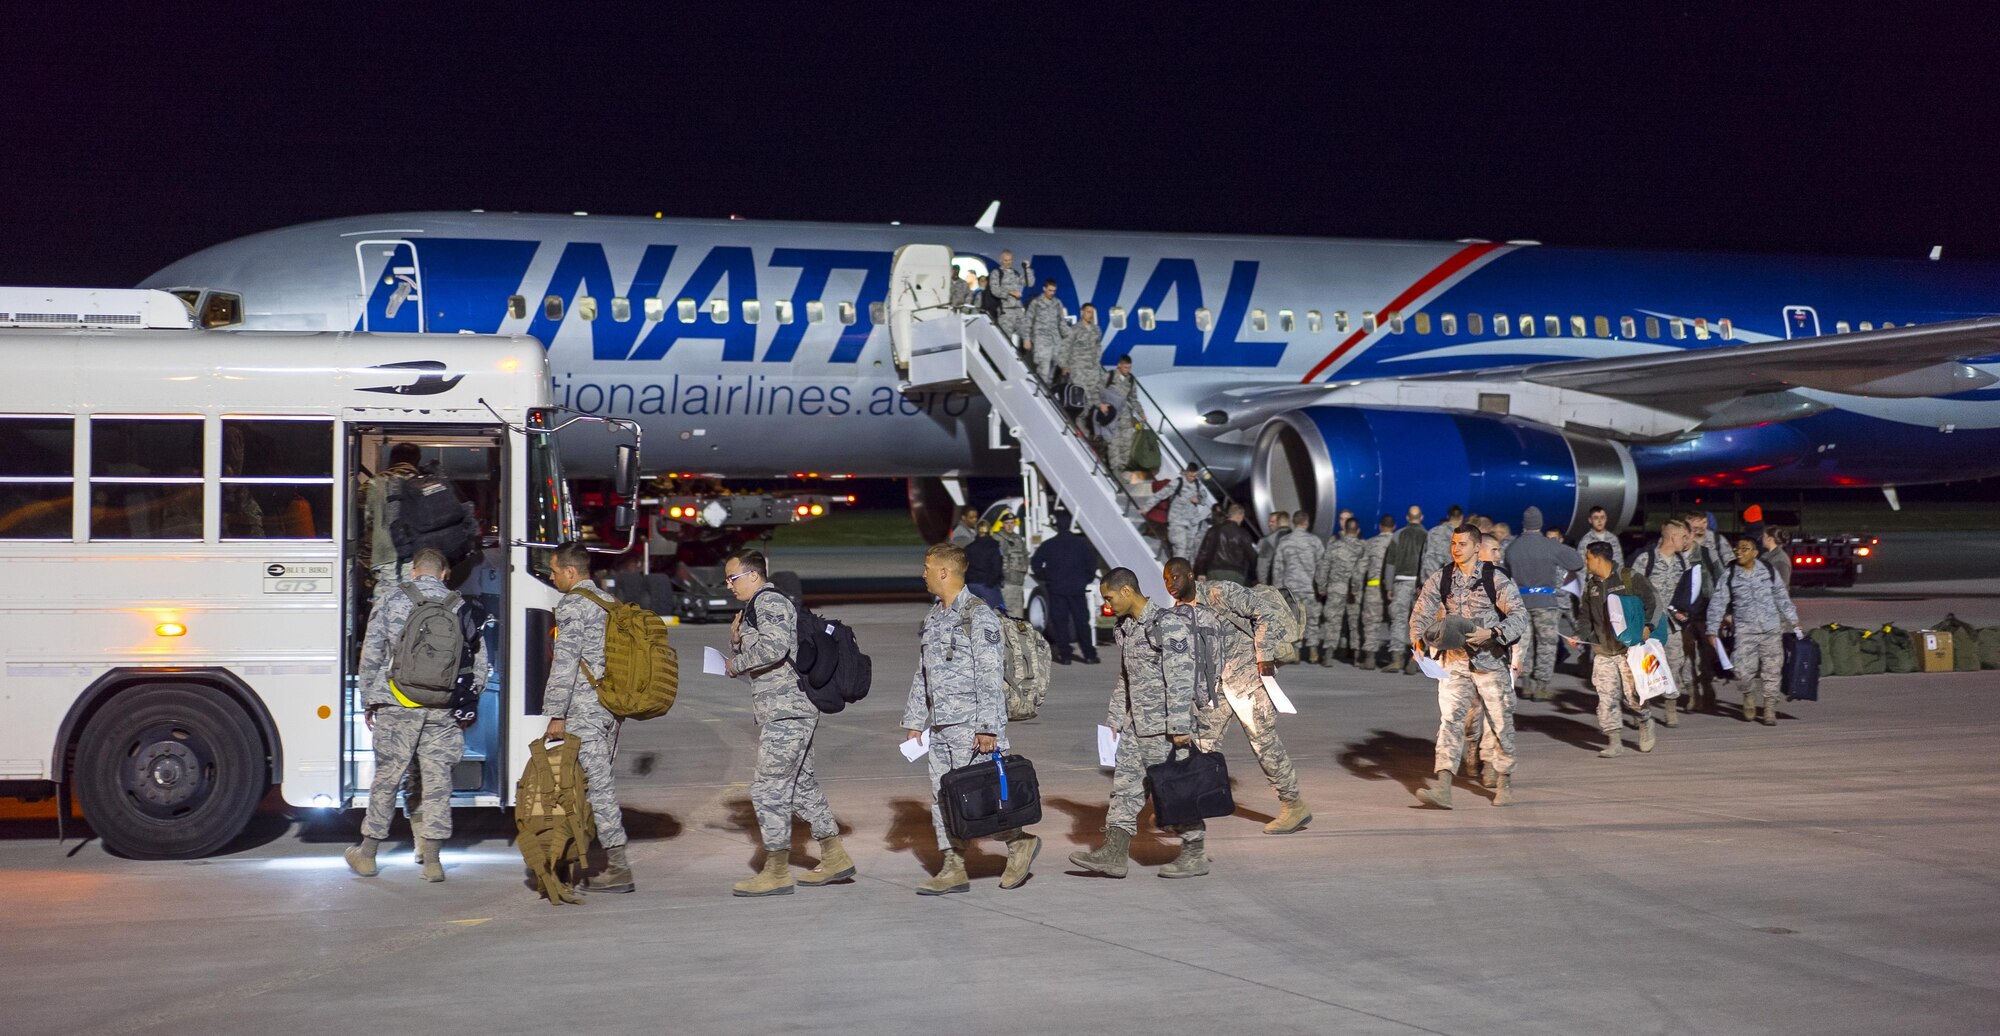 Returning airmen deplane at Mountain Home Air Force Base, Idaho, April 22, 2017. More than 100 airmen assigned to the 726th Air Control Squadron returned from a six-month deployment to locations throughout Southwest Asia. They provided theater command and control for air operations in one of the most complicated airspaces in Air Force history. (U.S. Air Force photo/Staff Sgt. Samuel Morse)